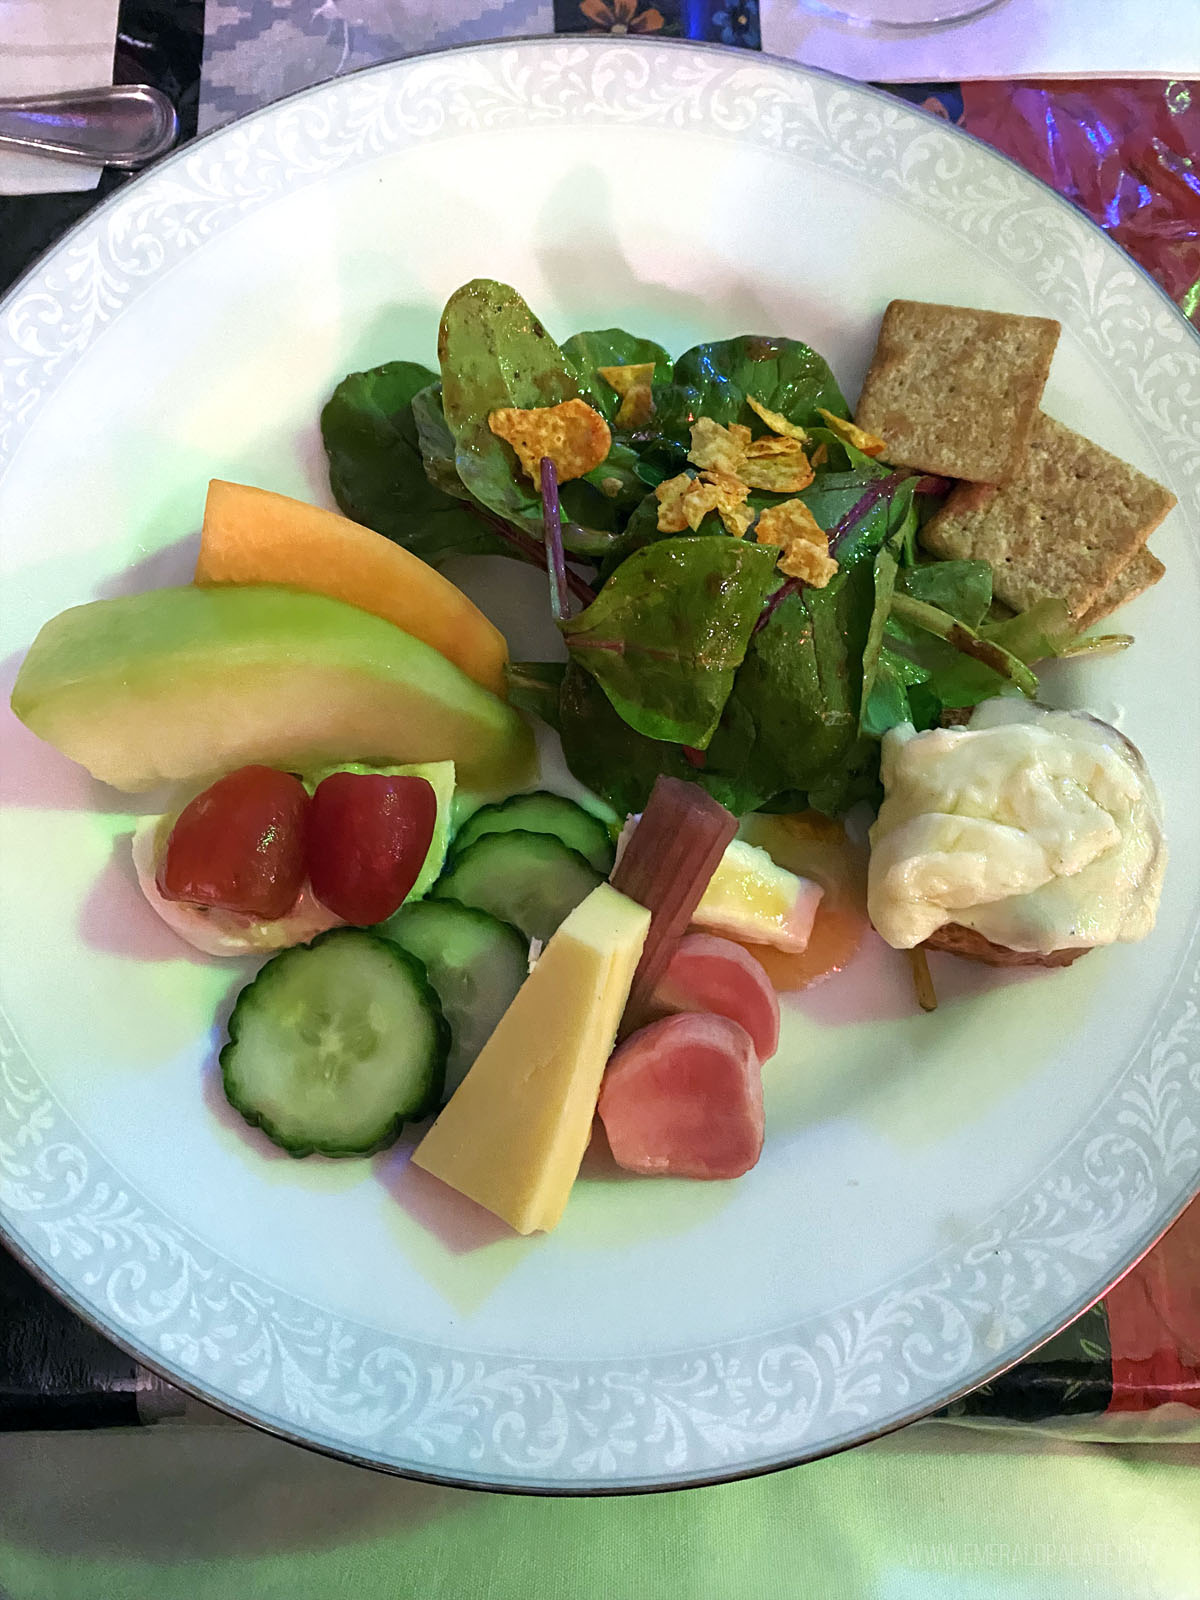 salad, fruit, and cheese plate